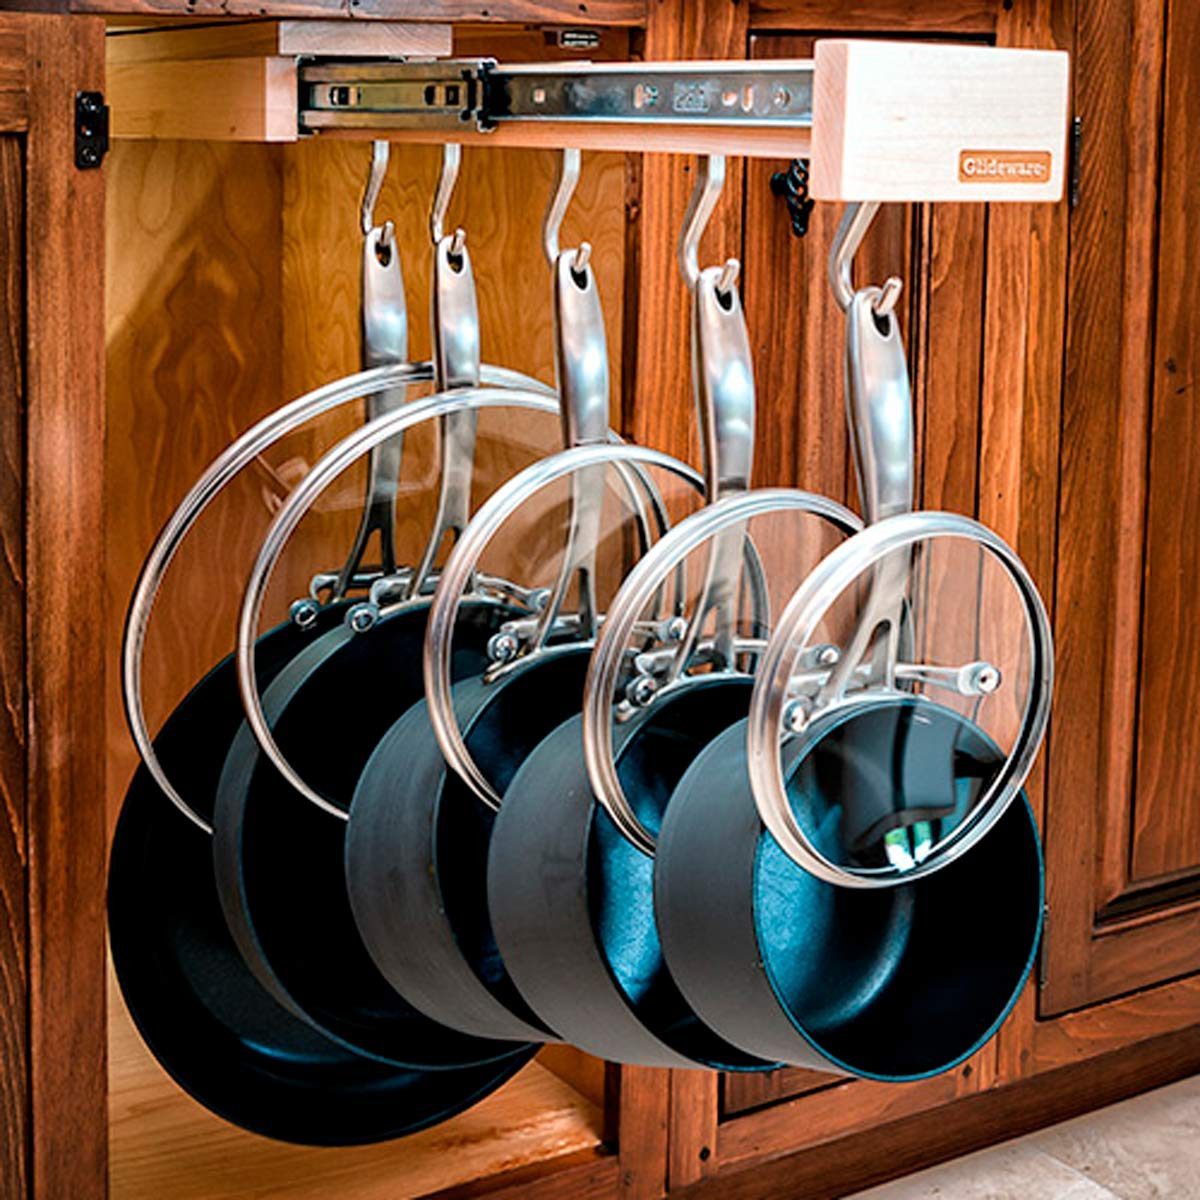 Kitchen Pots And Pans Organizer
 15 Kitchen Cabinet Organizers That Will Change Your Life